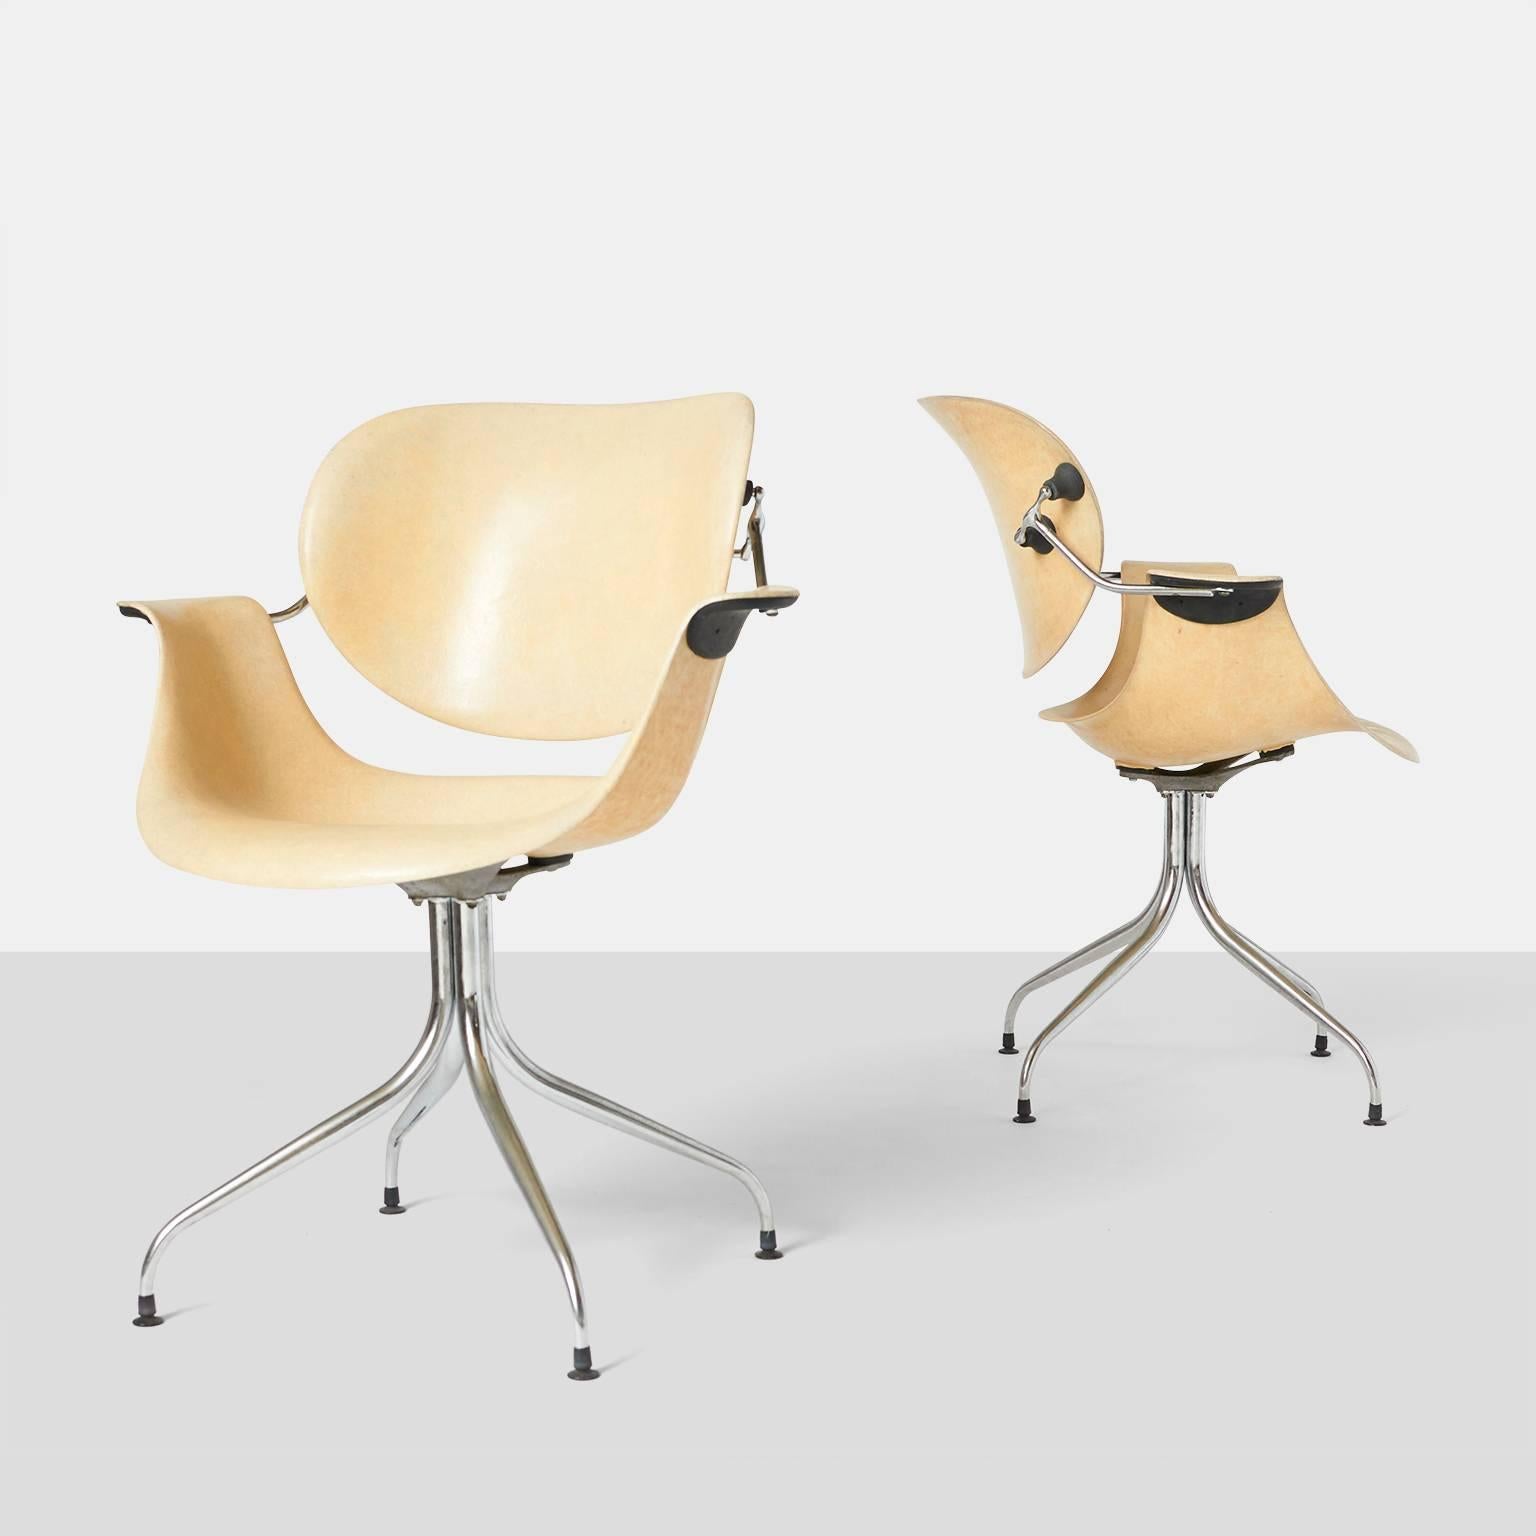 An extremely rare pair of swan leg chairs in fiberglass with chromed base by Herman Miller. The advanced design of the mechanism on outside allows the backrest to move freely form the seat. Retains the original label,
USA, circa 1954.